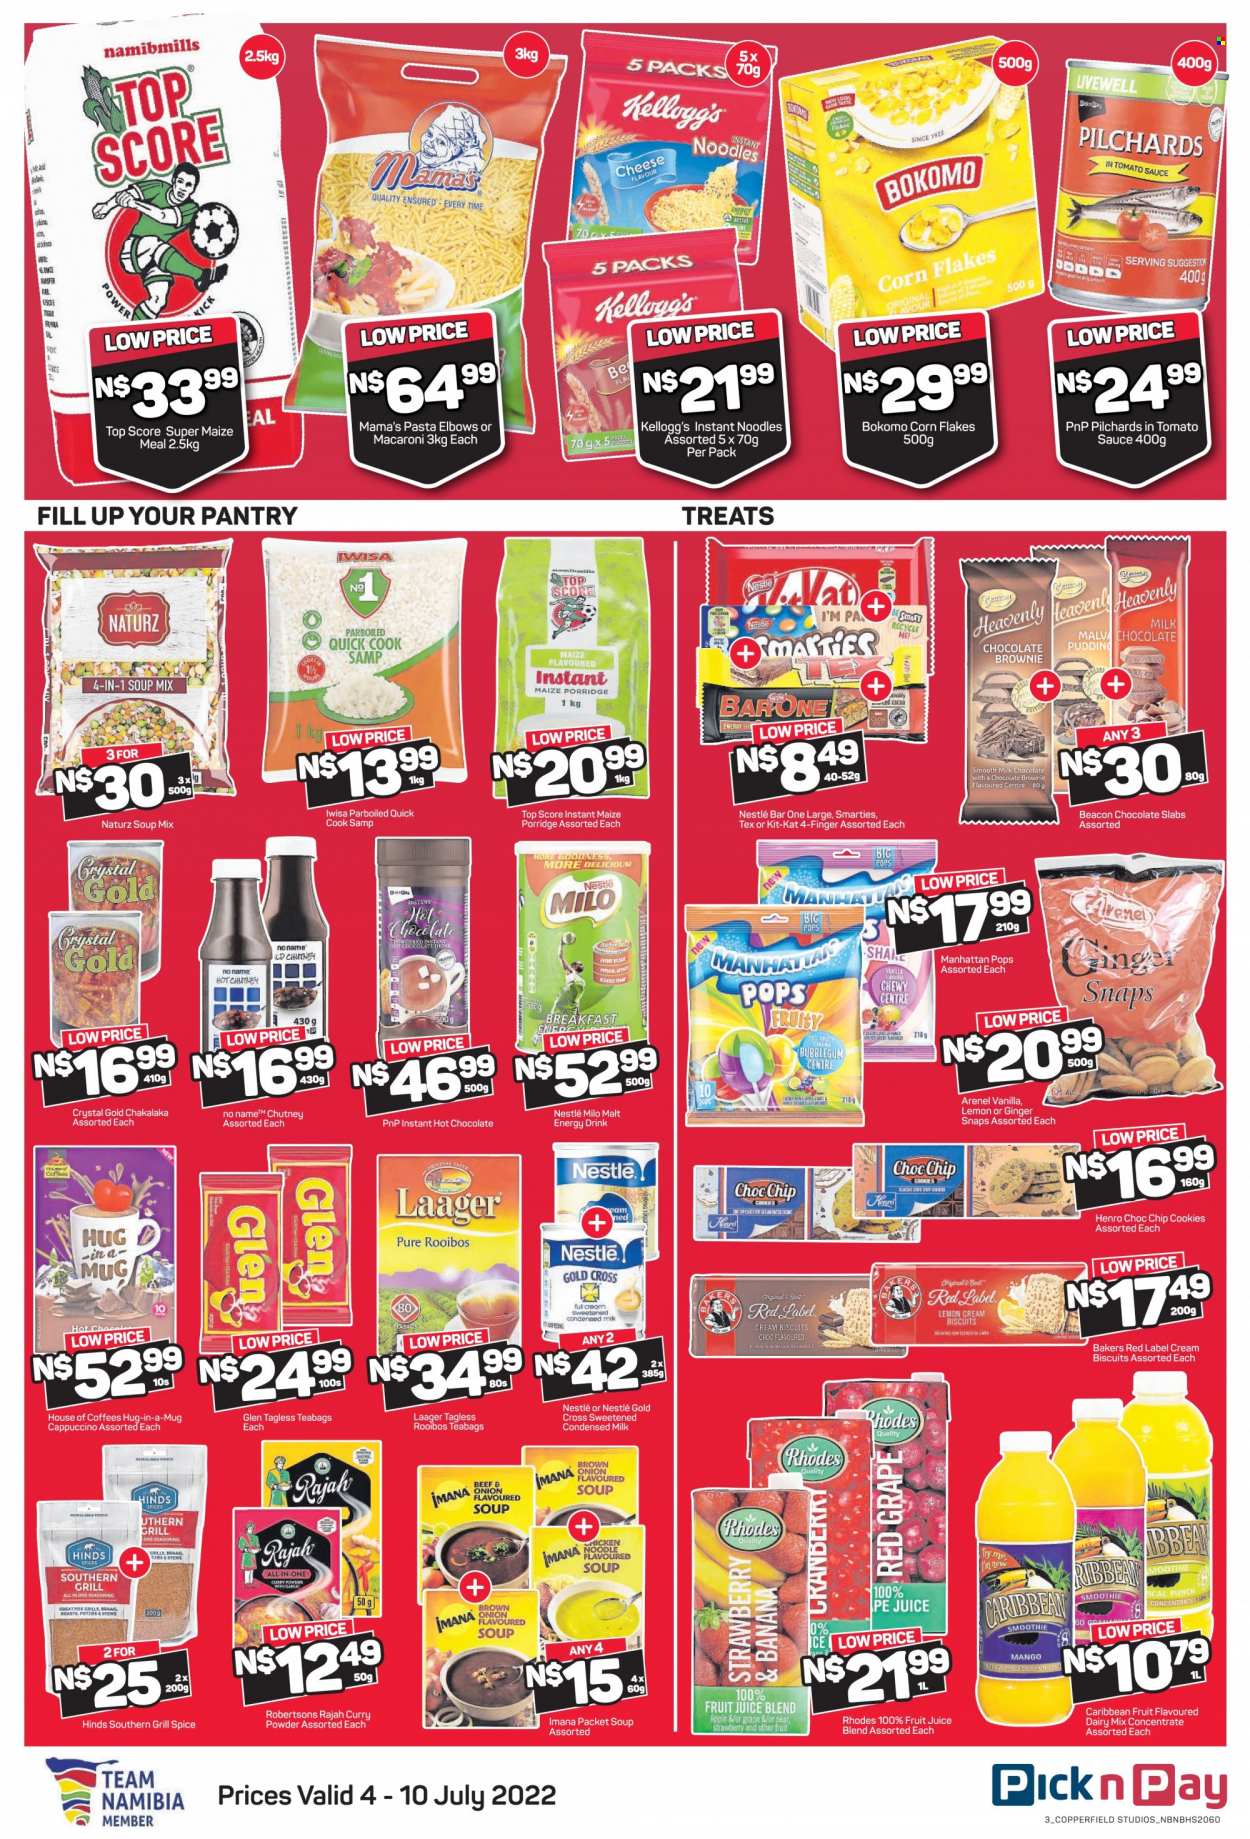 Pick n Pay catalogue  - 04/07/2022 - 10/07/2022 - Sales products - brownies, bananas, pears, sardines, No Name, soup mix, macaroni, soup, pasta, instant noodles, chakalaka, noodles, Mama's, cheese, pudding, chocolate pudding, condensed milk, Milo, cookies, milk chocolate, Nestlé, chocolate slabs, bubblegum, Smarties, Kellogg's, biscuit, maize meal, corn flakes, porridge, spice, curry powder, Hinds, chutney, energy drink, fruit juice, juice, smoothie, chocolate drink, hot chocolate, tea, tea bags, rooibos tea, cappuccino, punch, Bakers. Page 3.